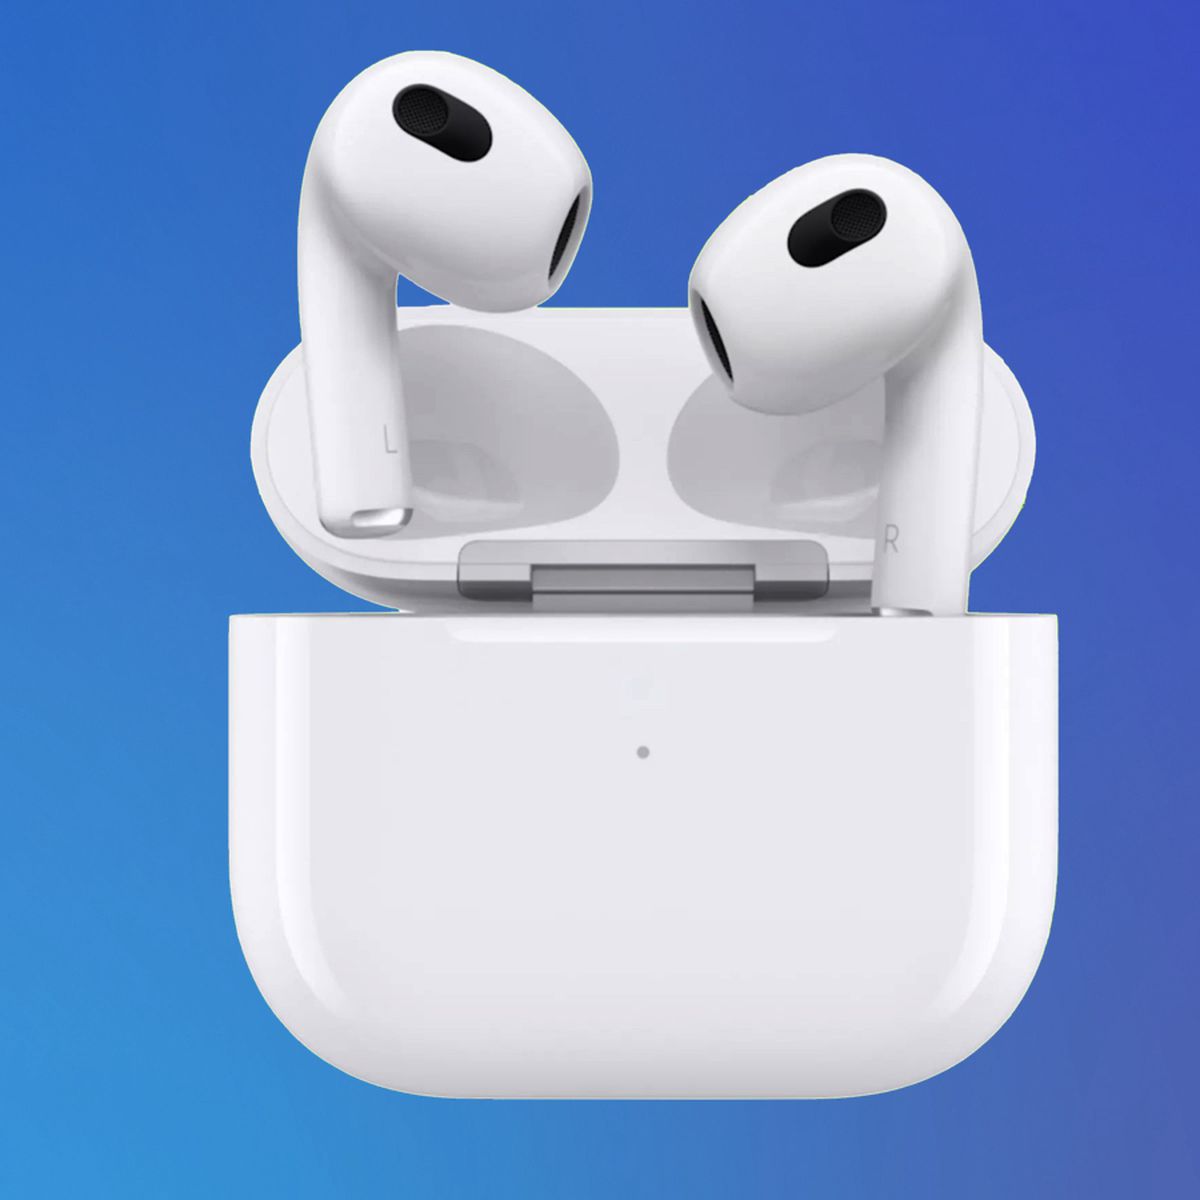 Apple's AirPods 3 Are Down To Their Lowest Price Ever at